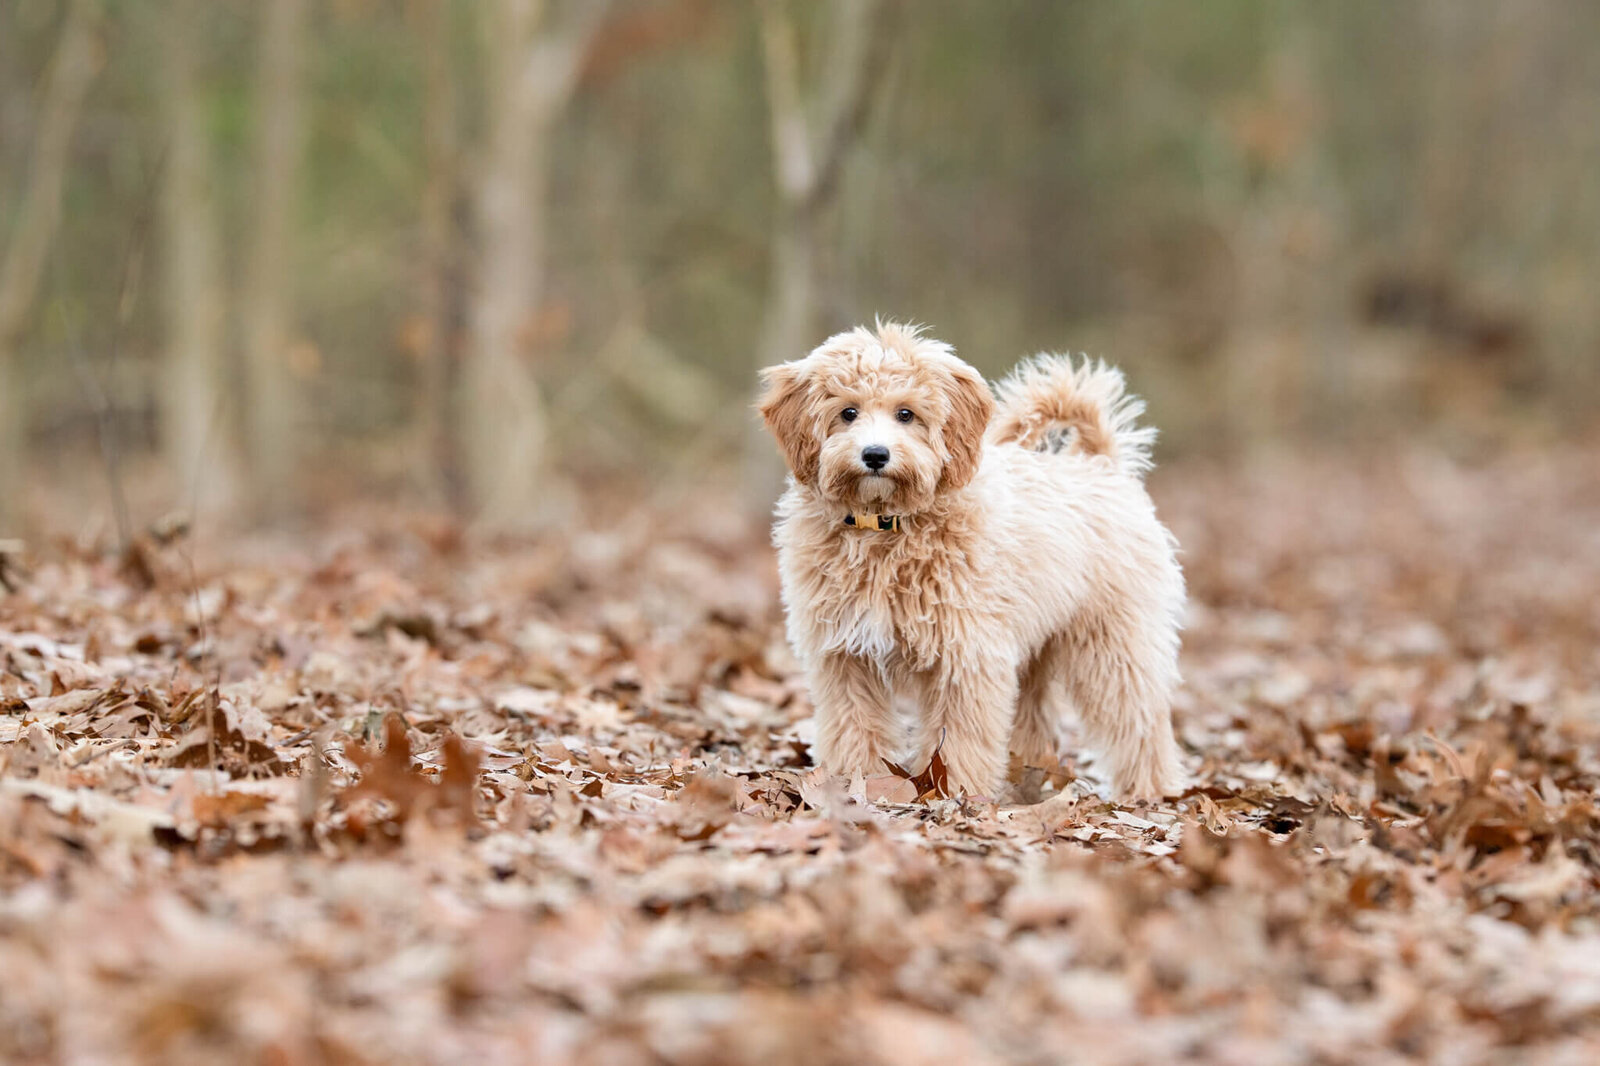 Adorable Golden Doodle puppy standing on a trail in the forest near Boston